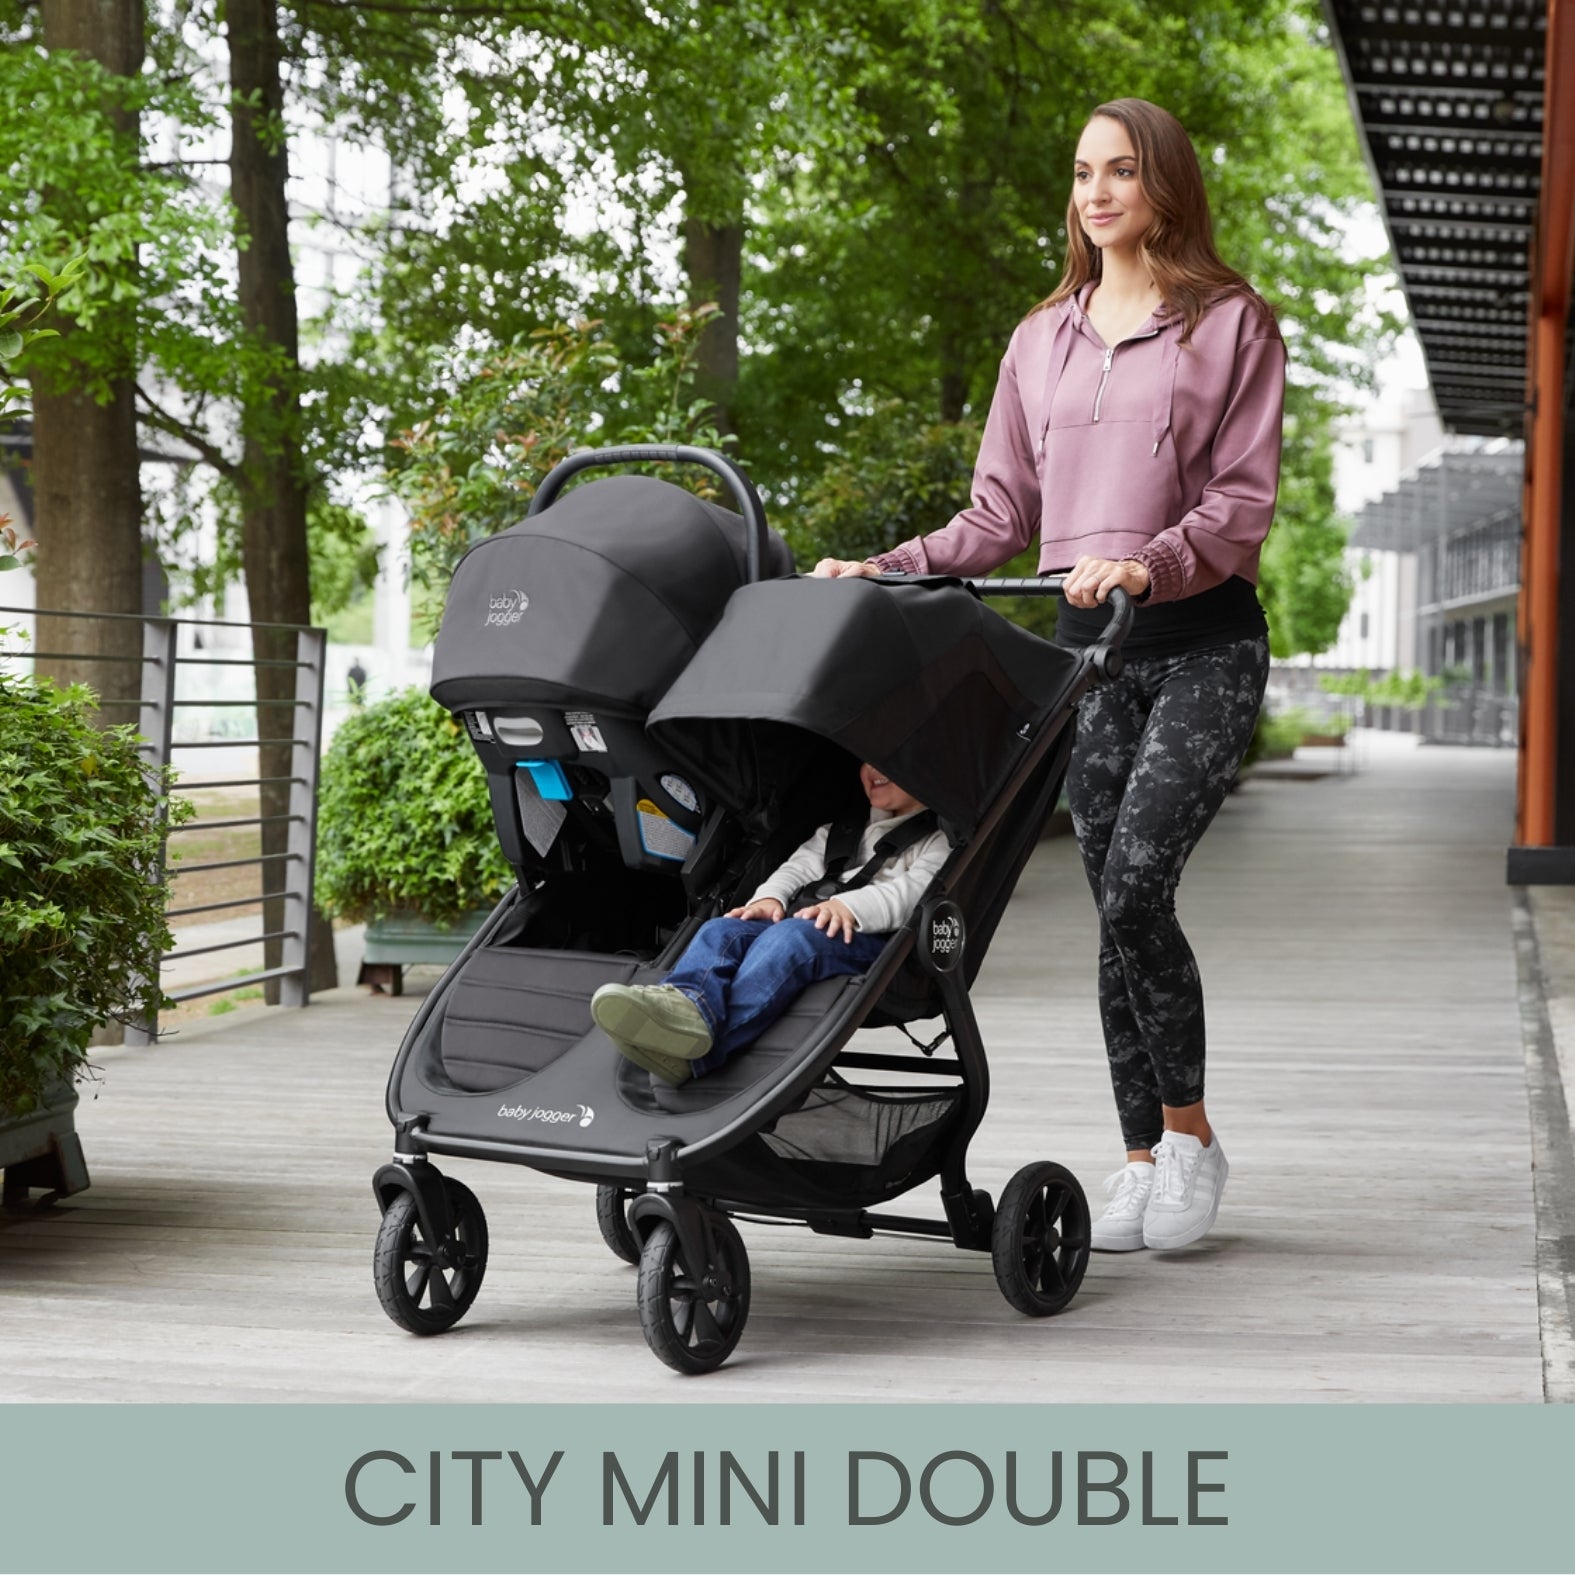 Car seats compatible with Baby Jogger City Mini Double Stroller